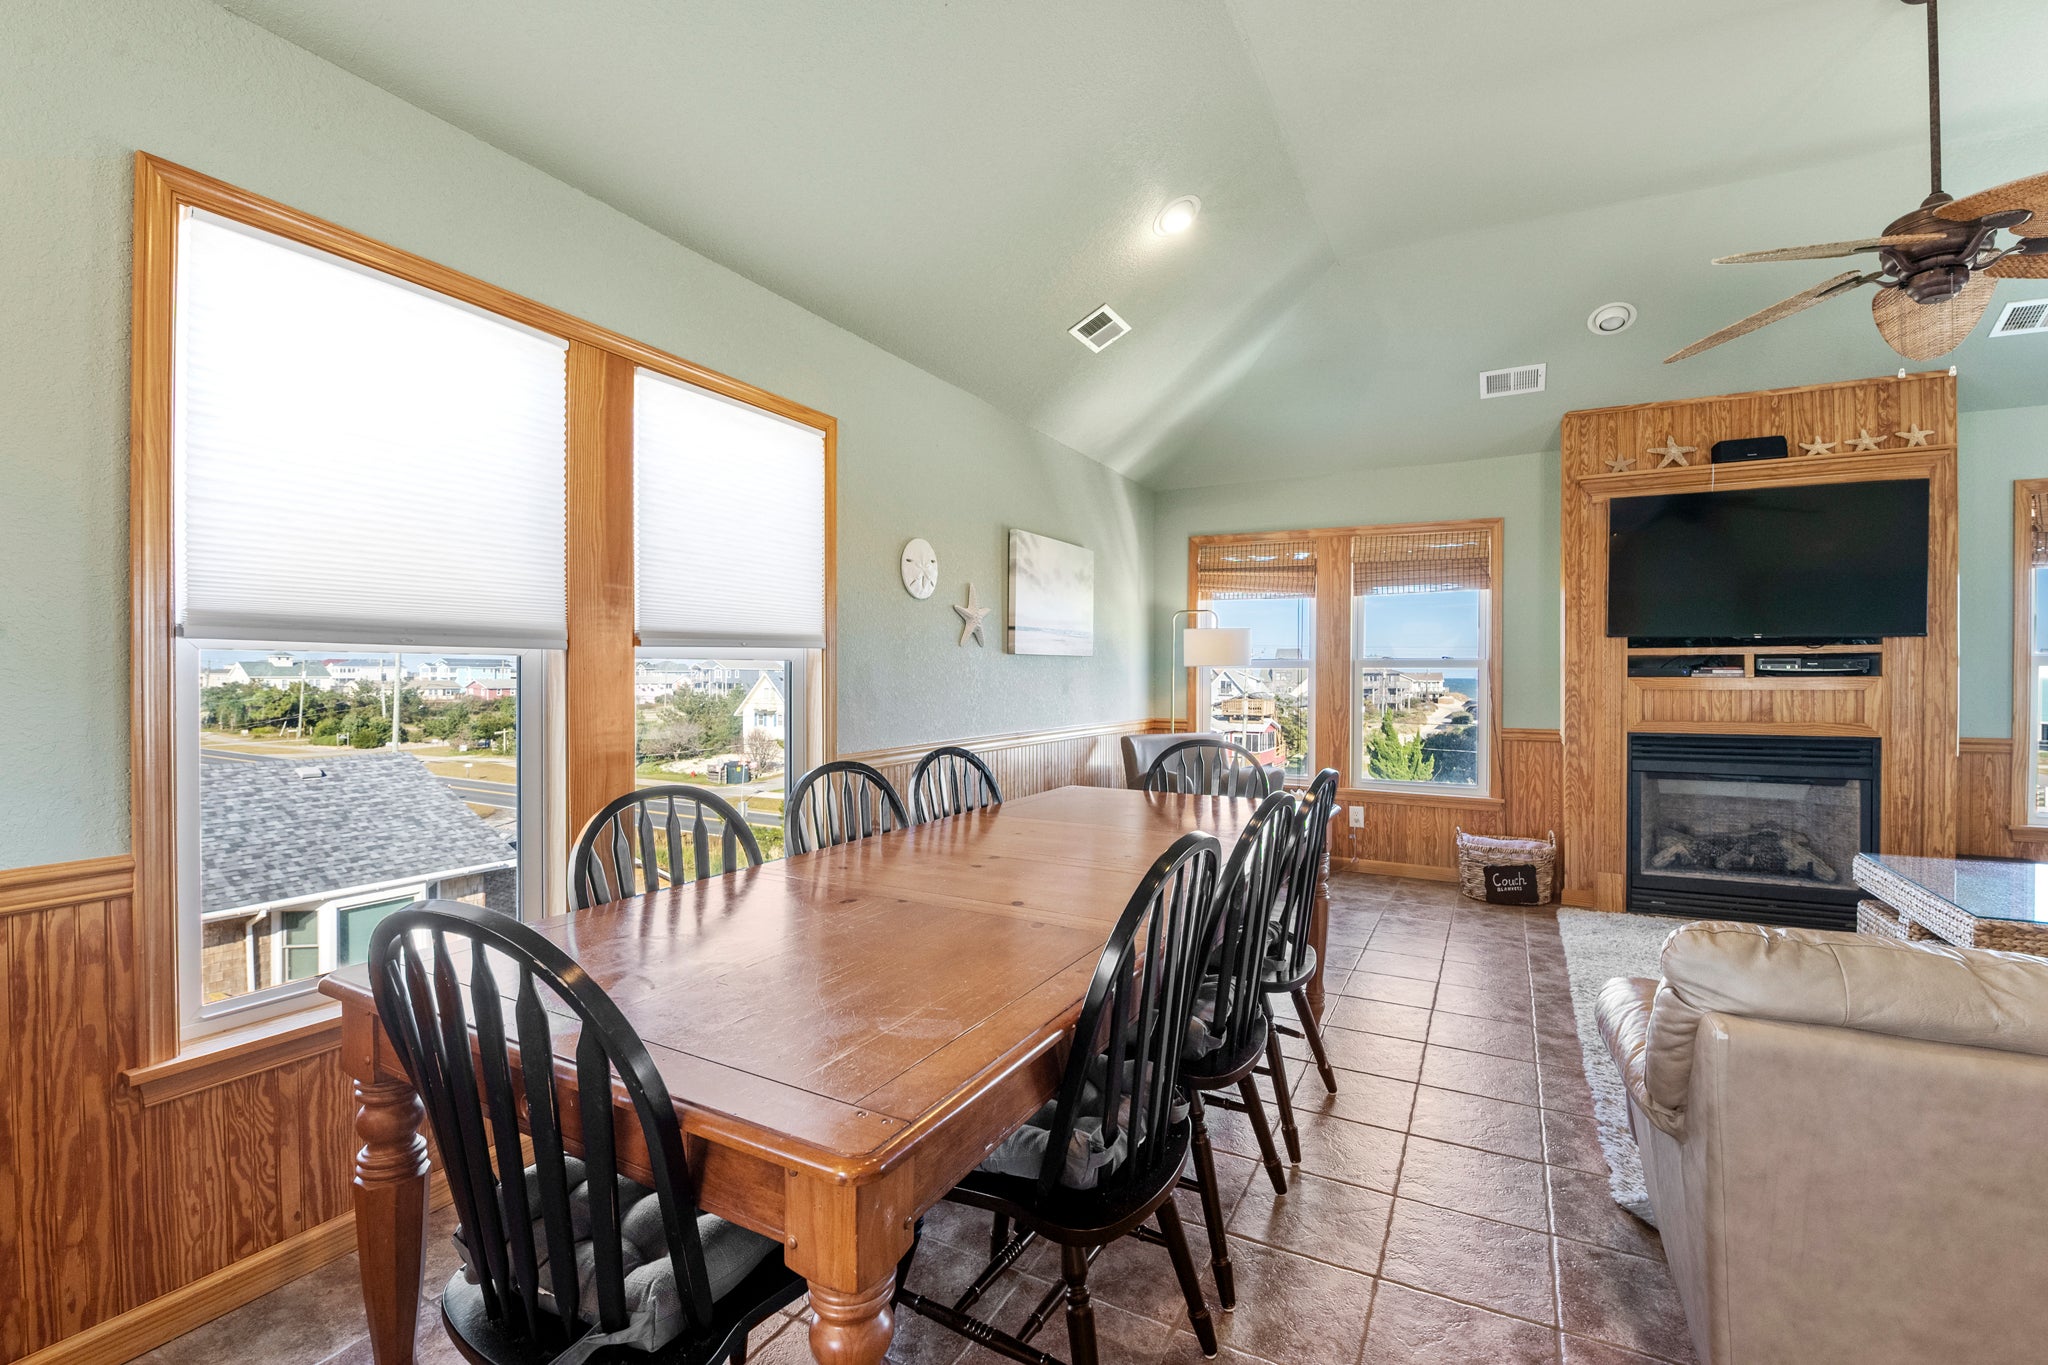 SN2344: Sassy Seas | Top Level Dining Area - Fireplace Not Available For Guest Use